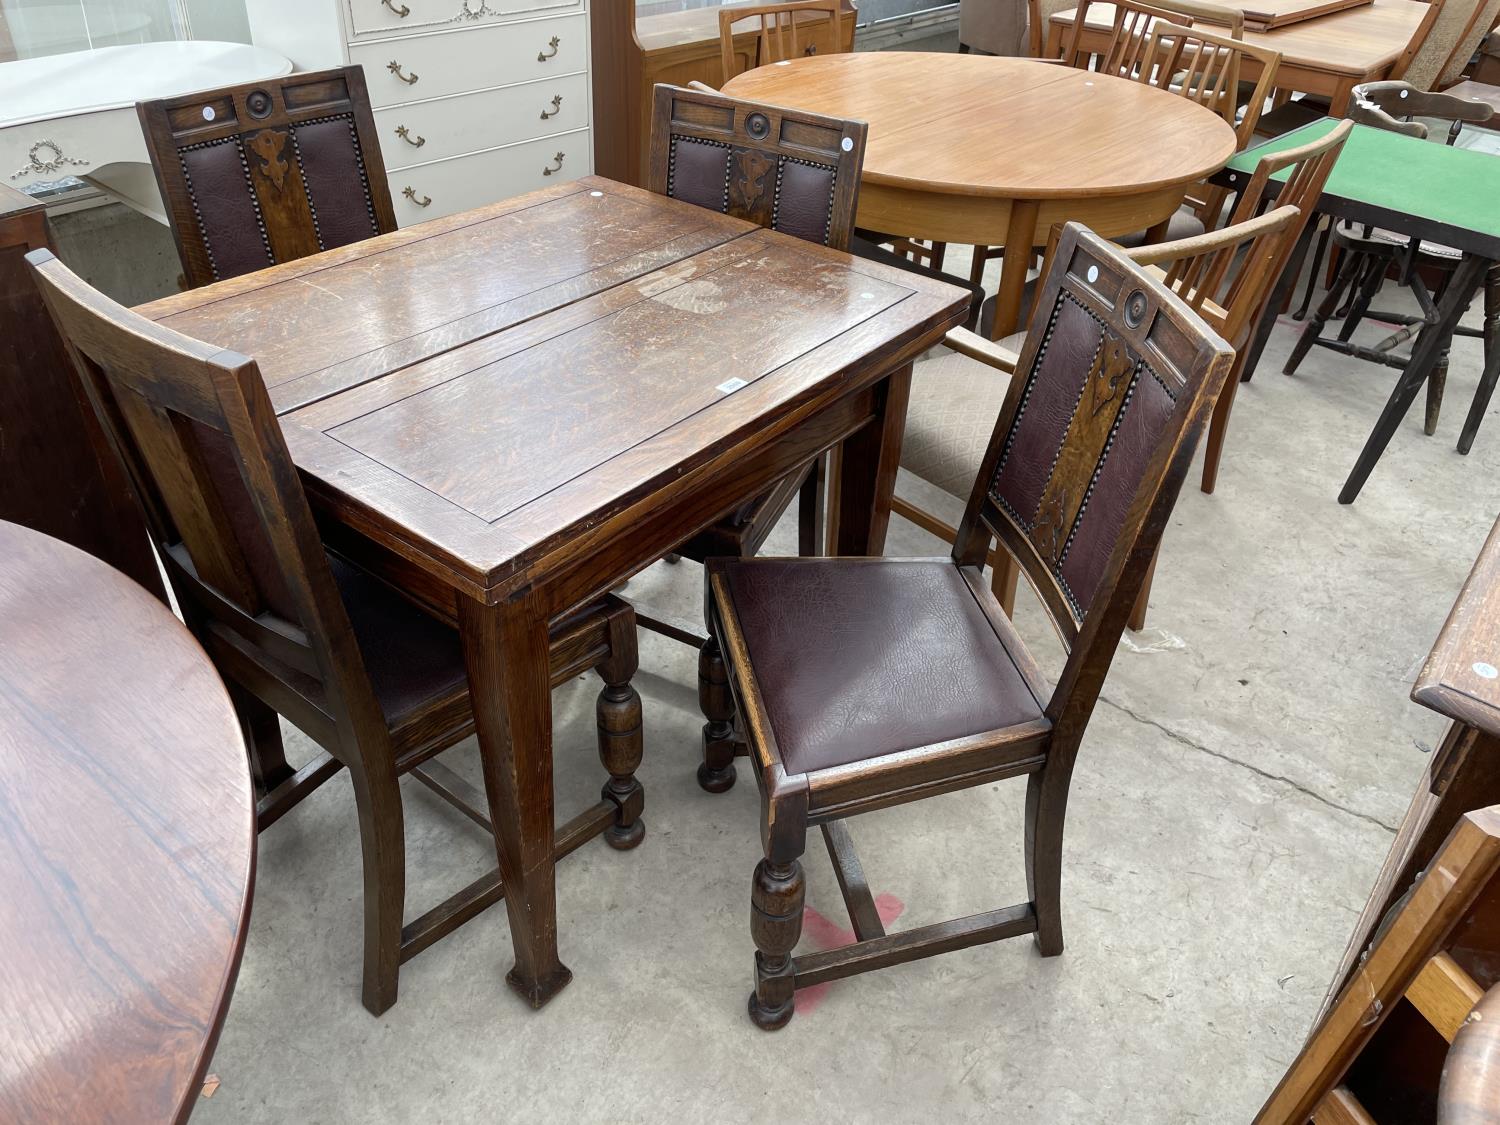 AN EARLY 20TH CENTURY OAK FOLD-OVER DINING TABLE WITH SCISSOR ACTION MECHANISM (PATENT NO.382428)